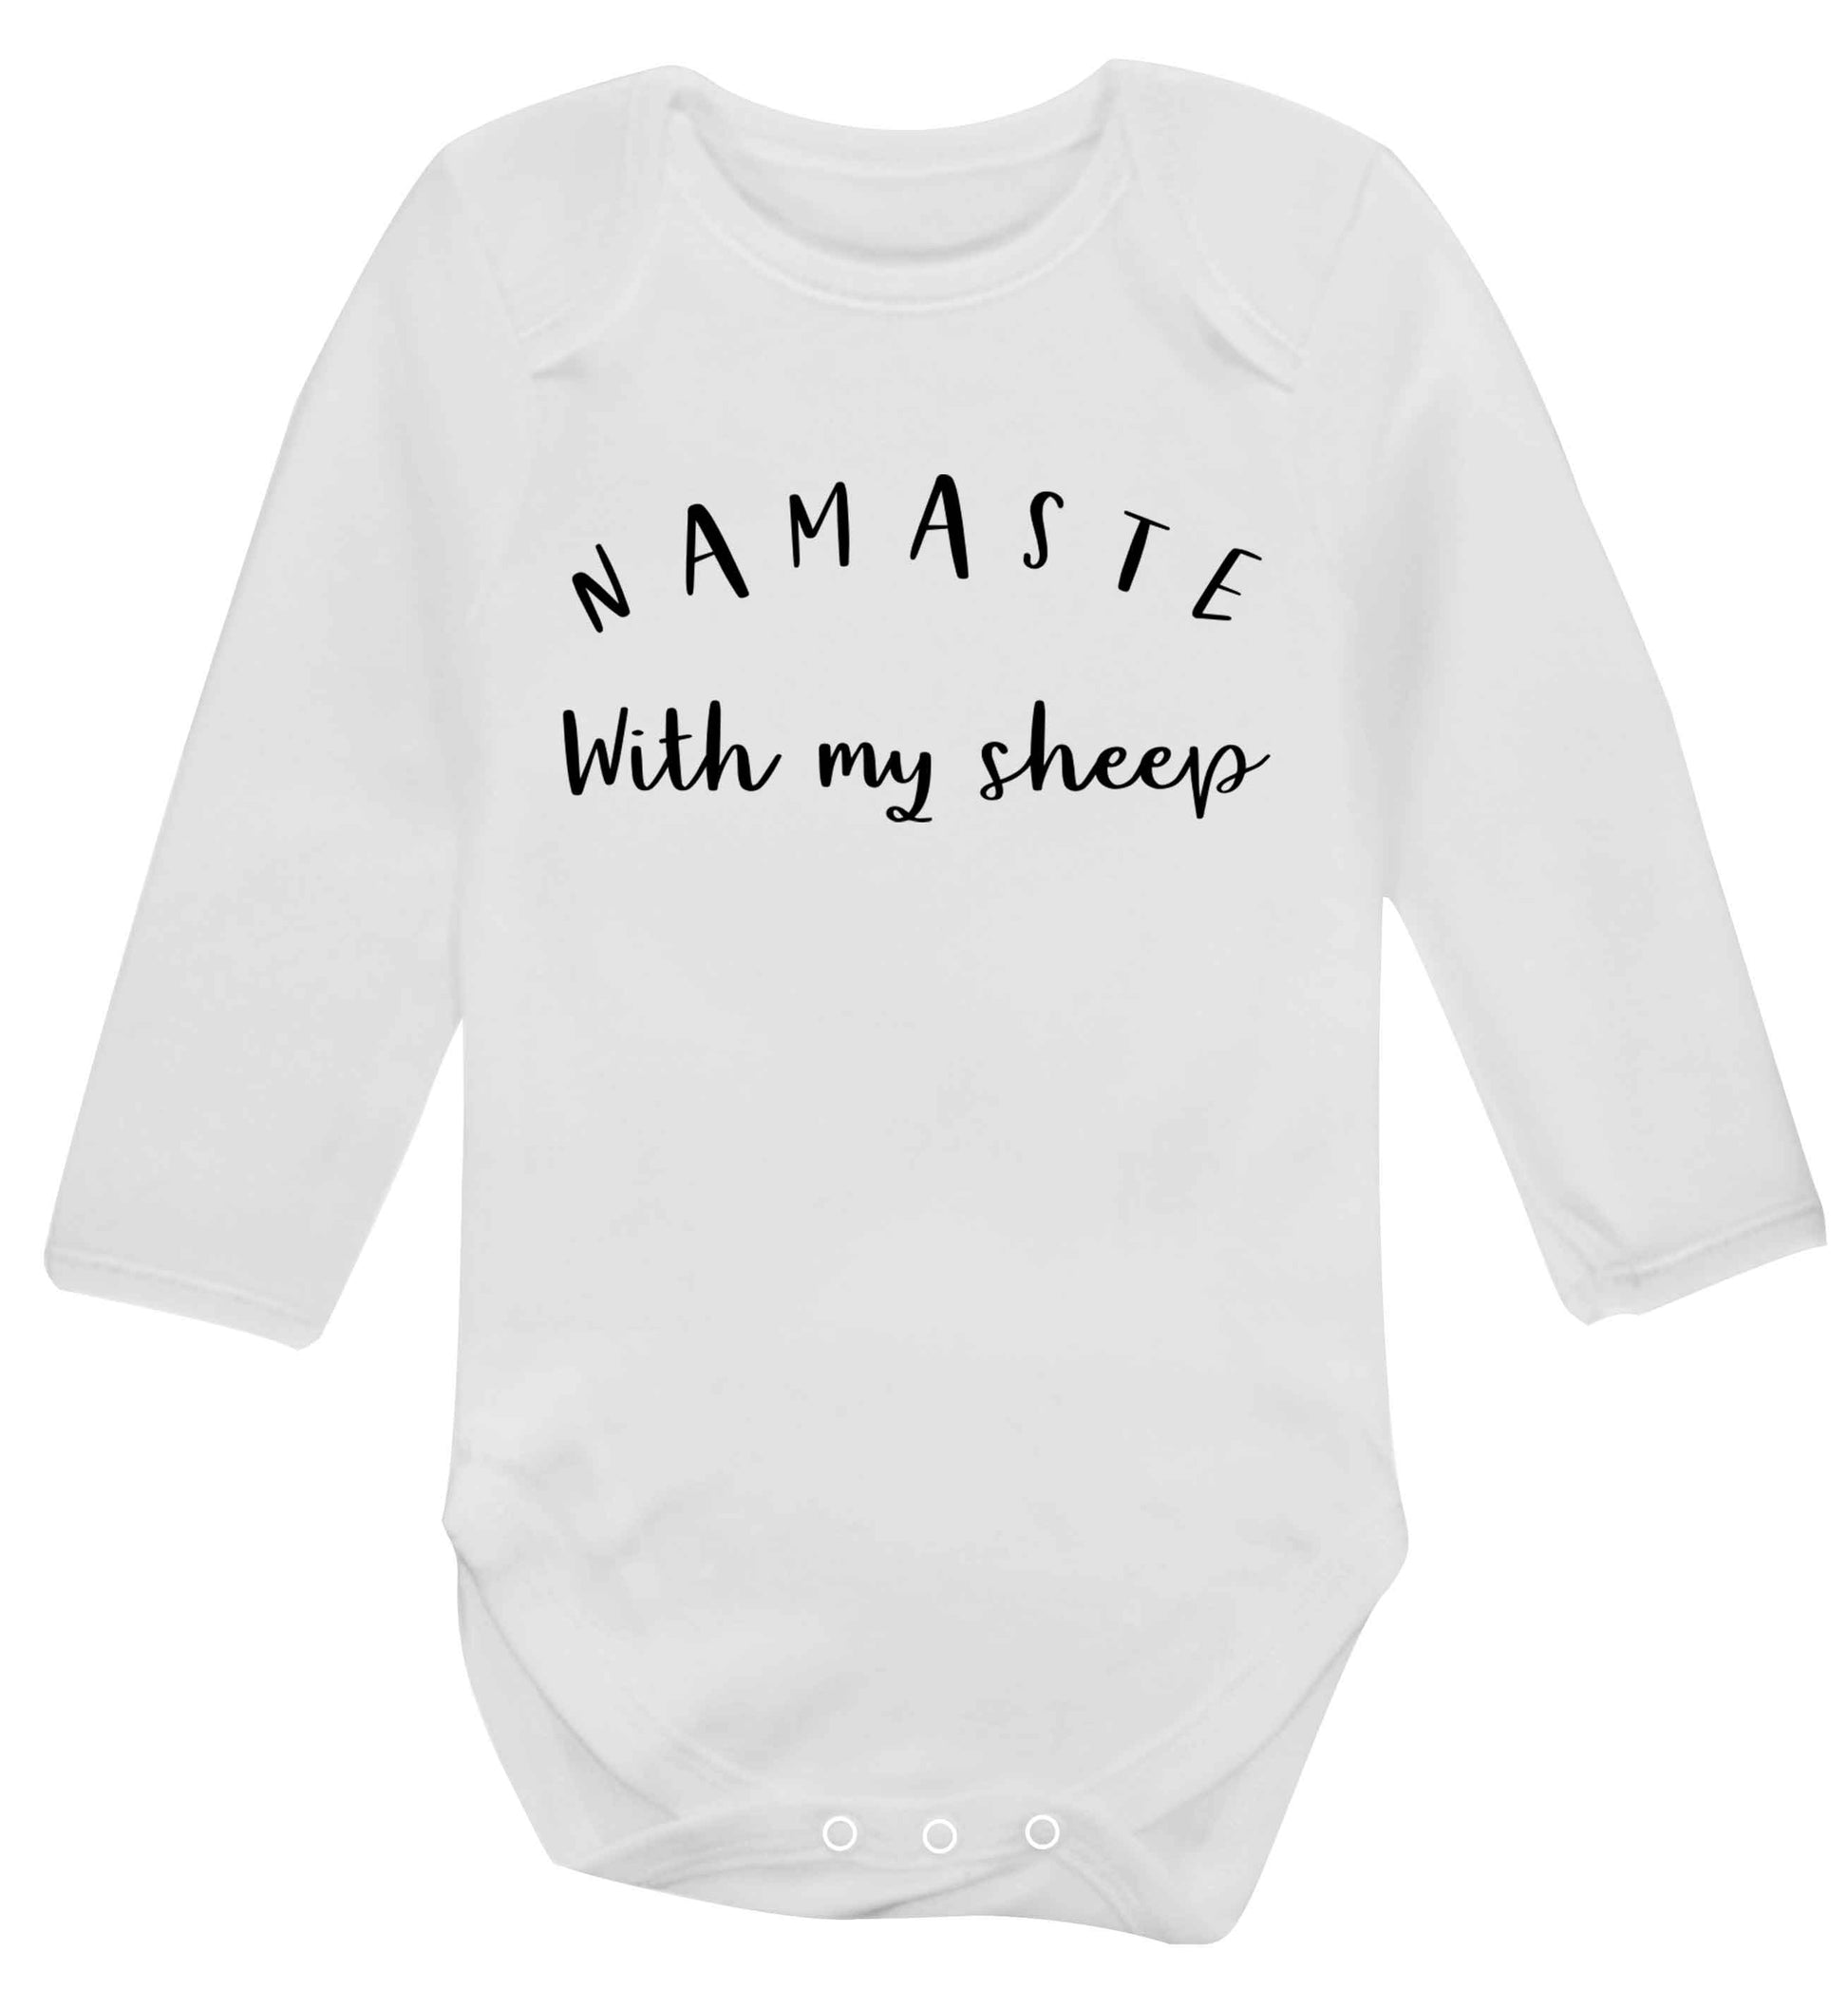 Namaste with my sheep Baby Vest long sleeved white 6-12 months